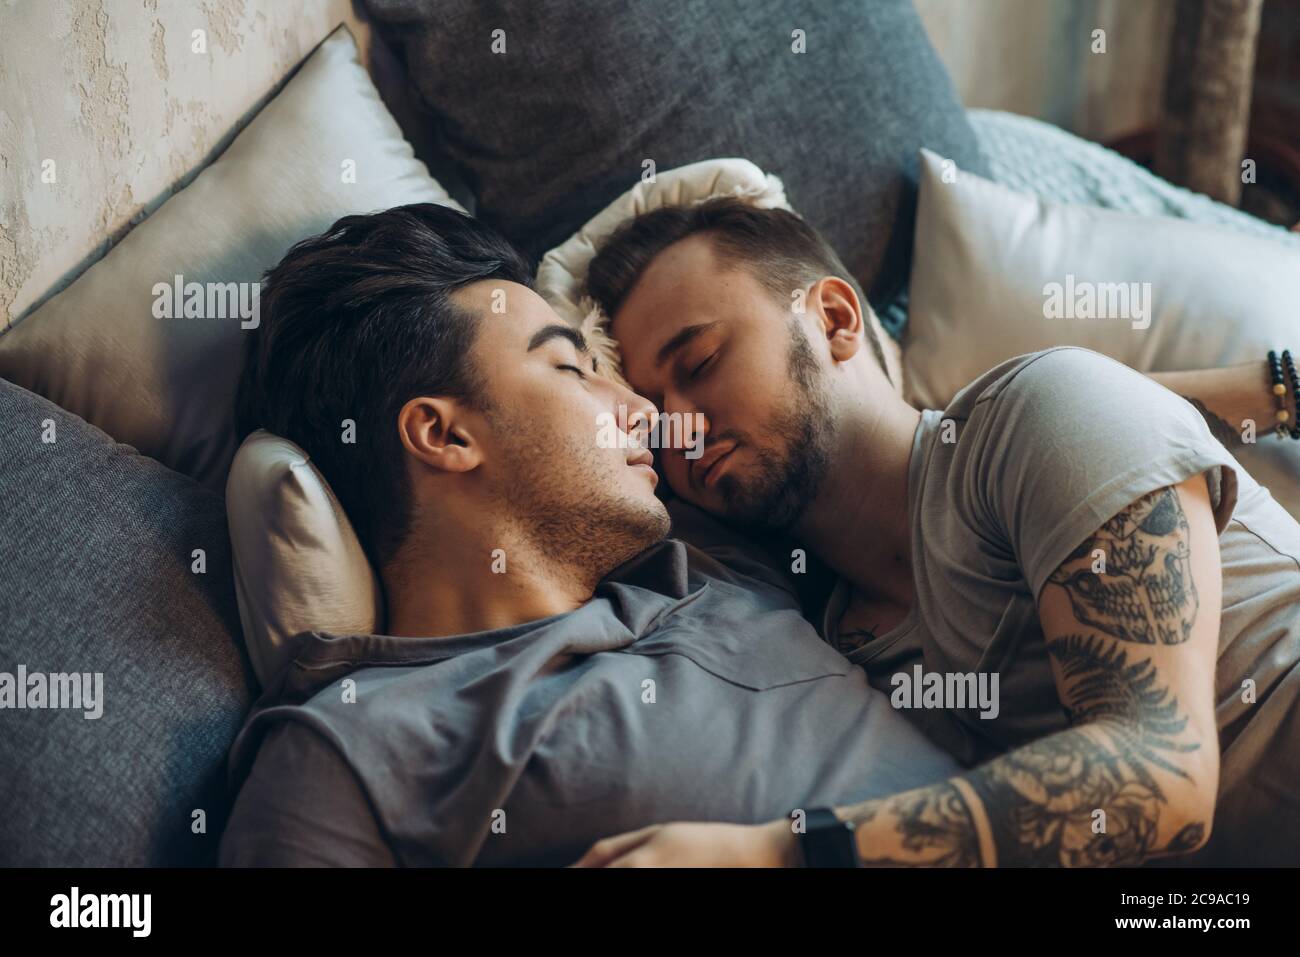 Young sweet couple have same-sex romance, embracing in bed kissing, passionate active man catches his boyfriend in caddle, honeymoon, LGBT concept Stock Photo